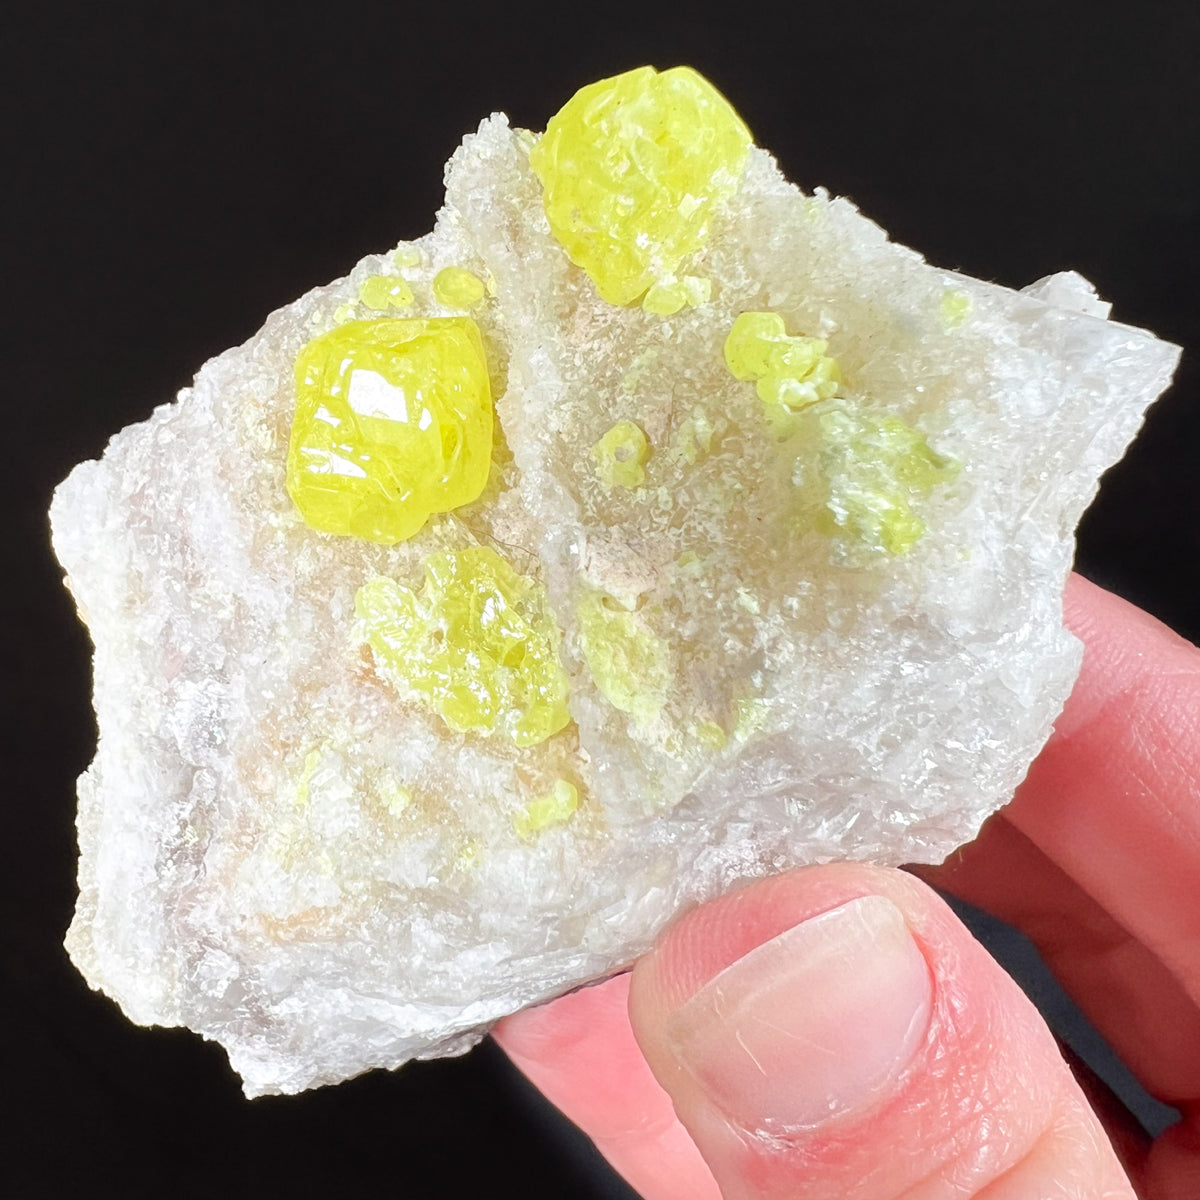 Sulfur crystals from Mexico